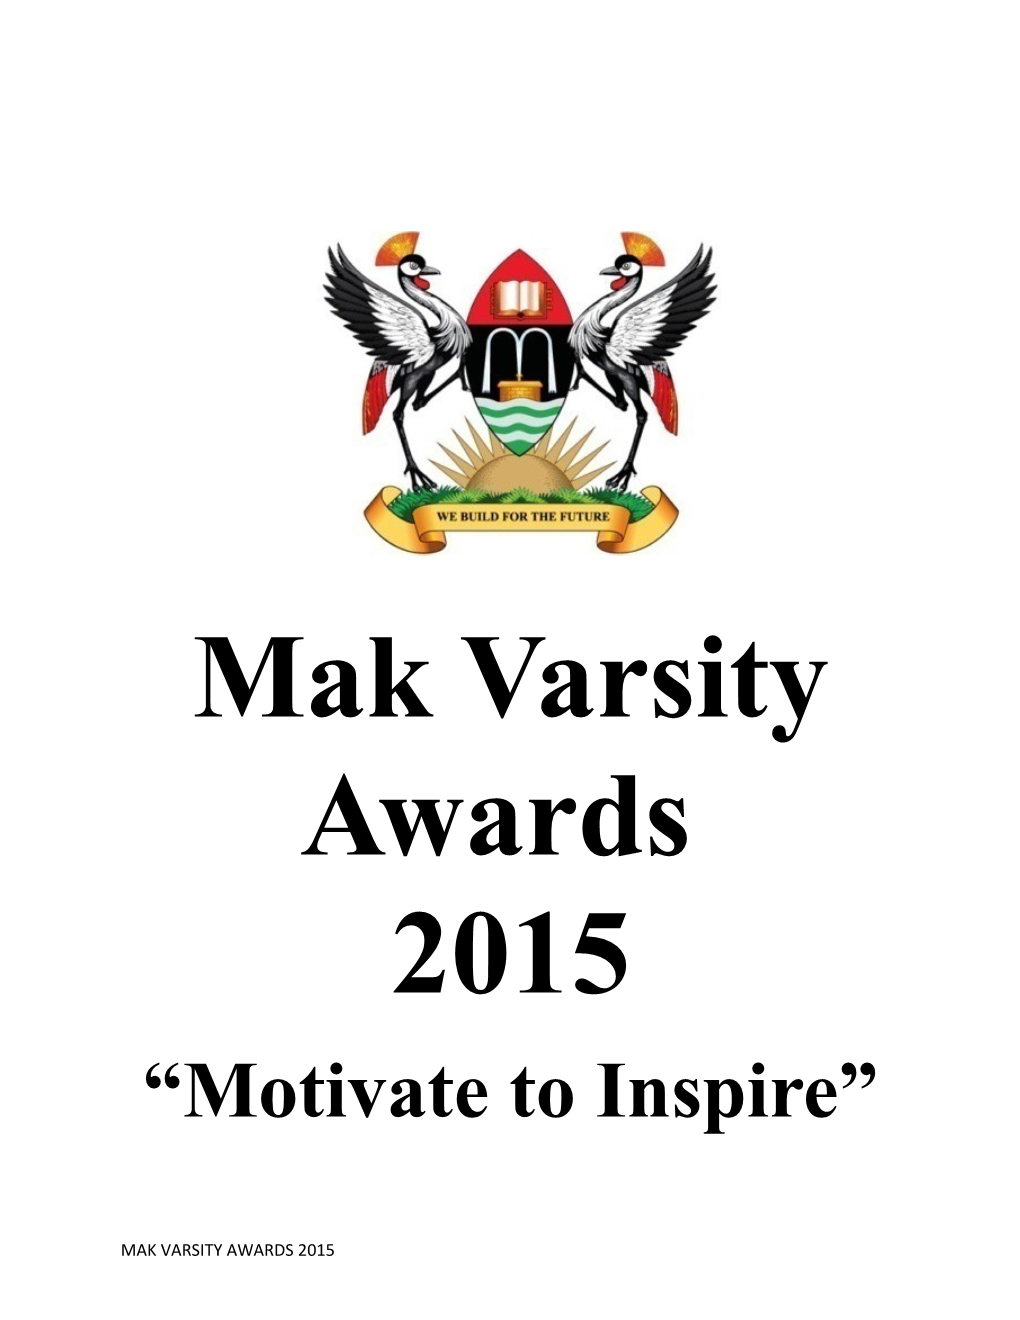 Mak Varsity Awards for Outstanding Students, Staff and Public